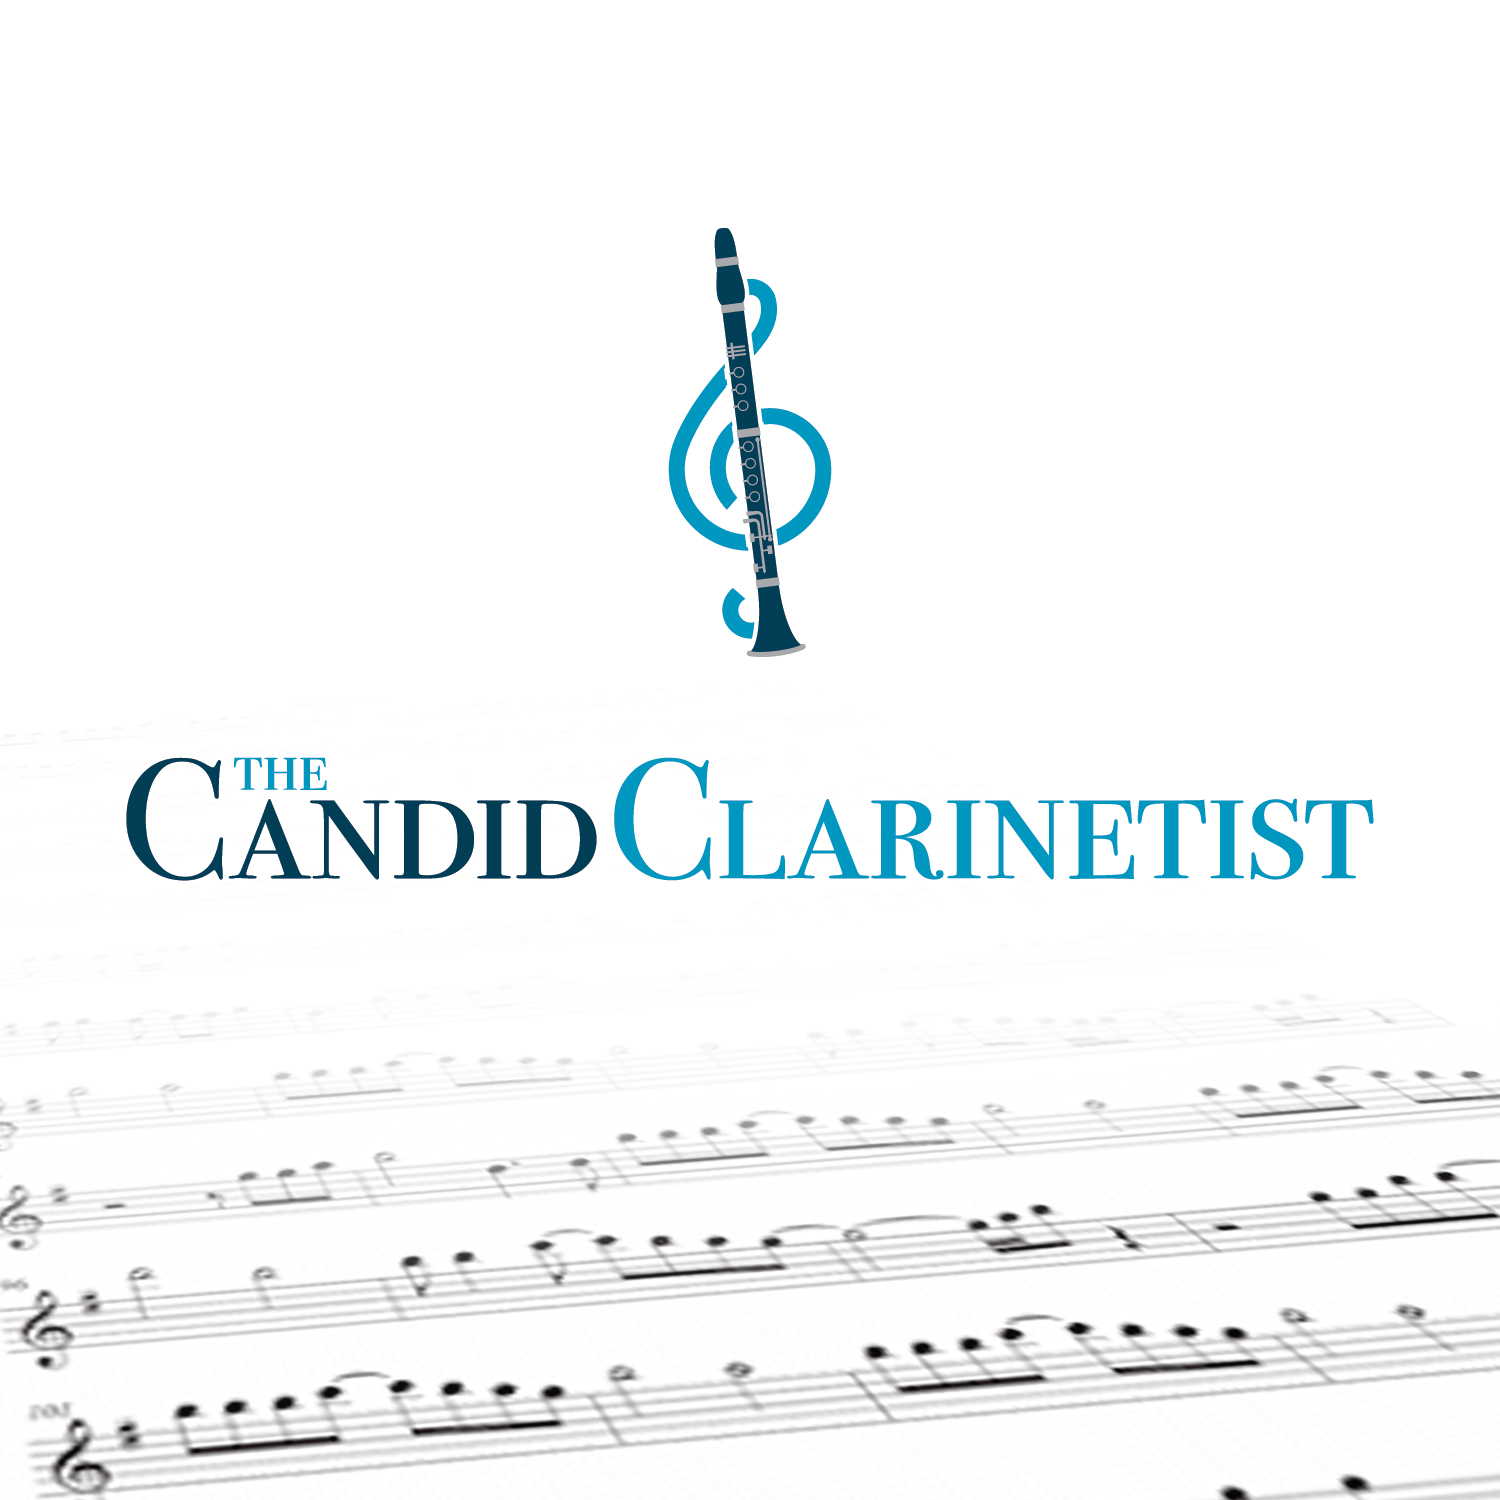 The Candid Clarinetist